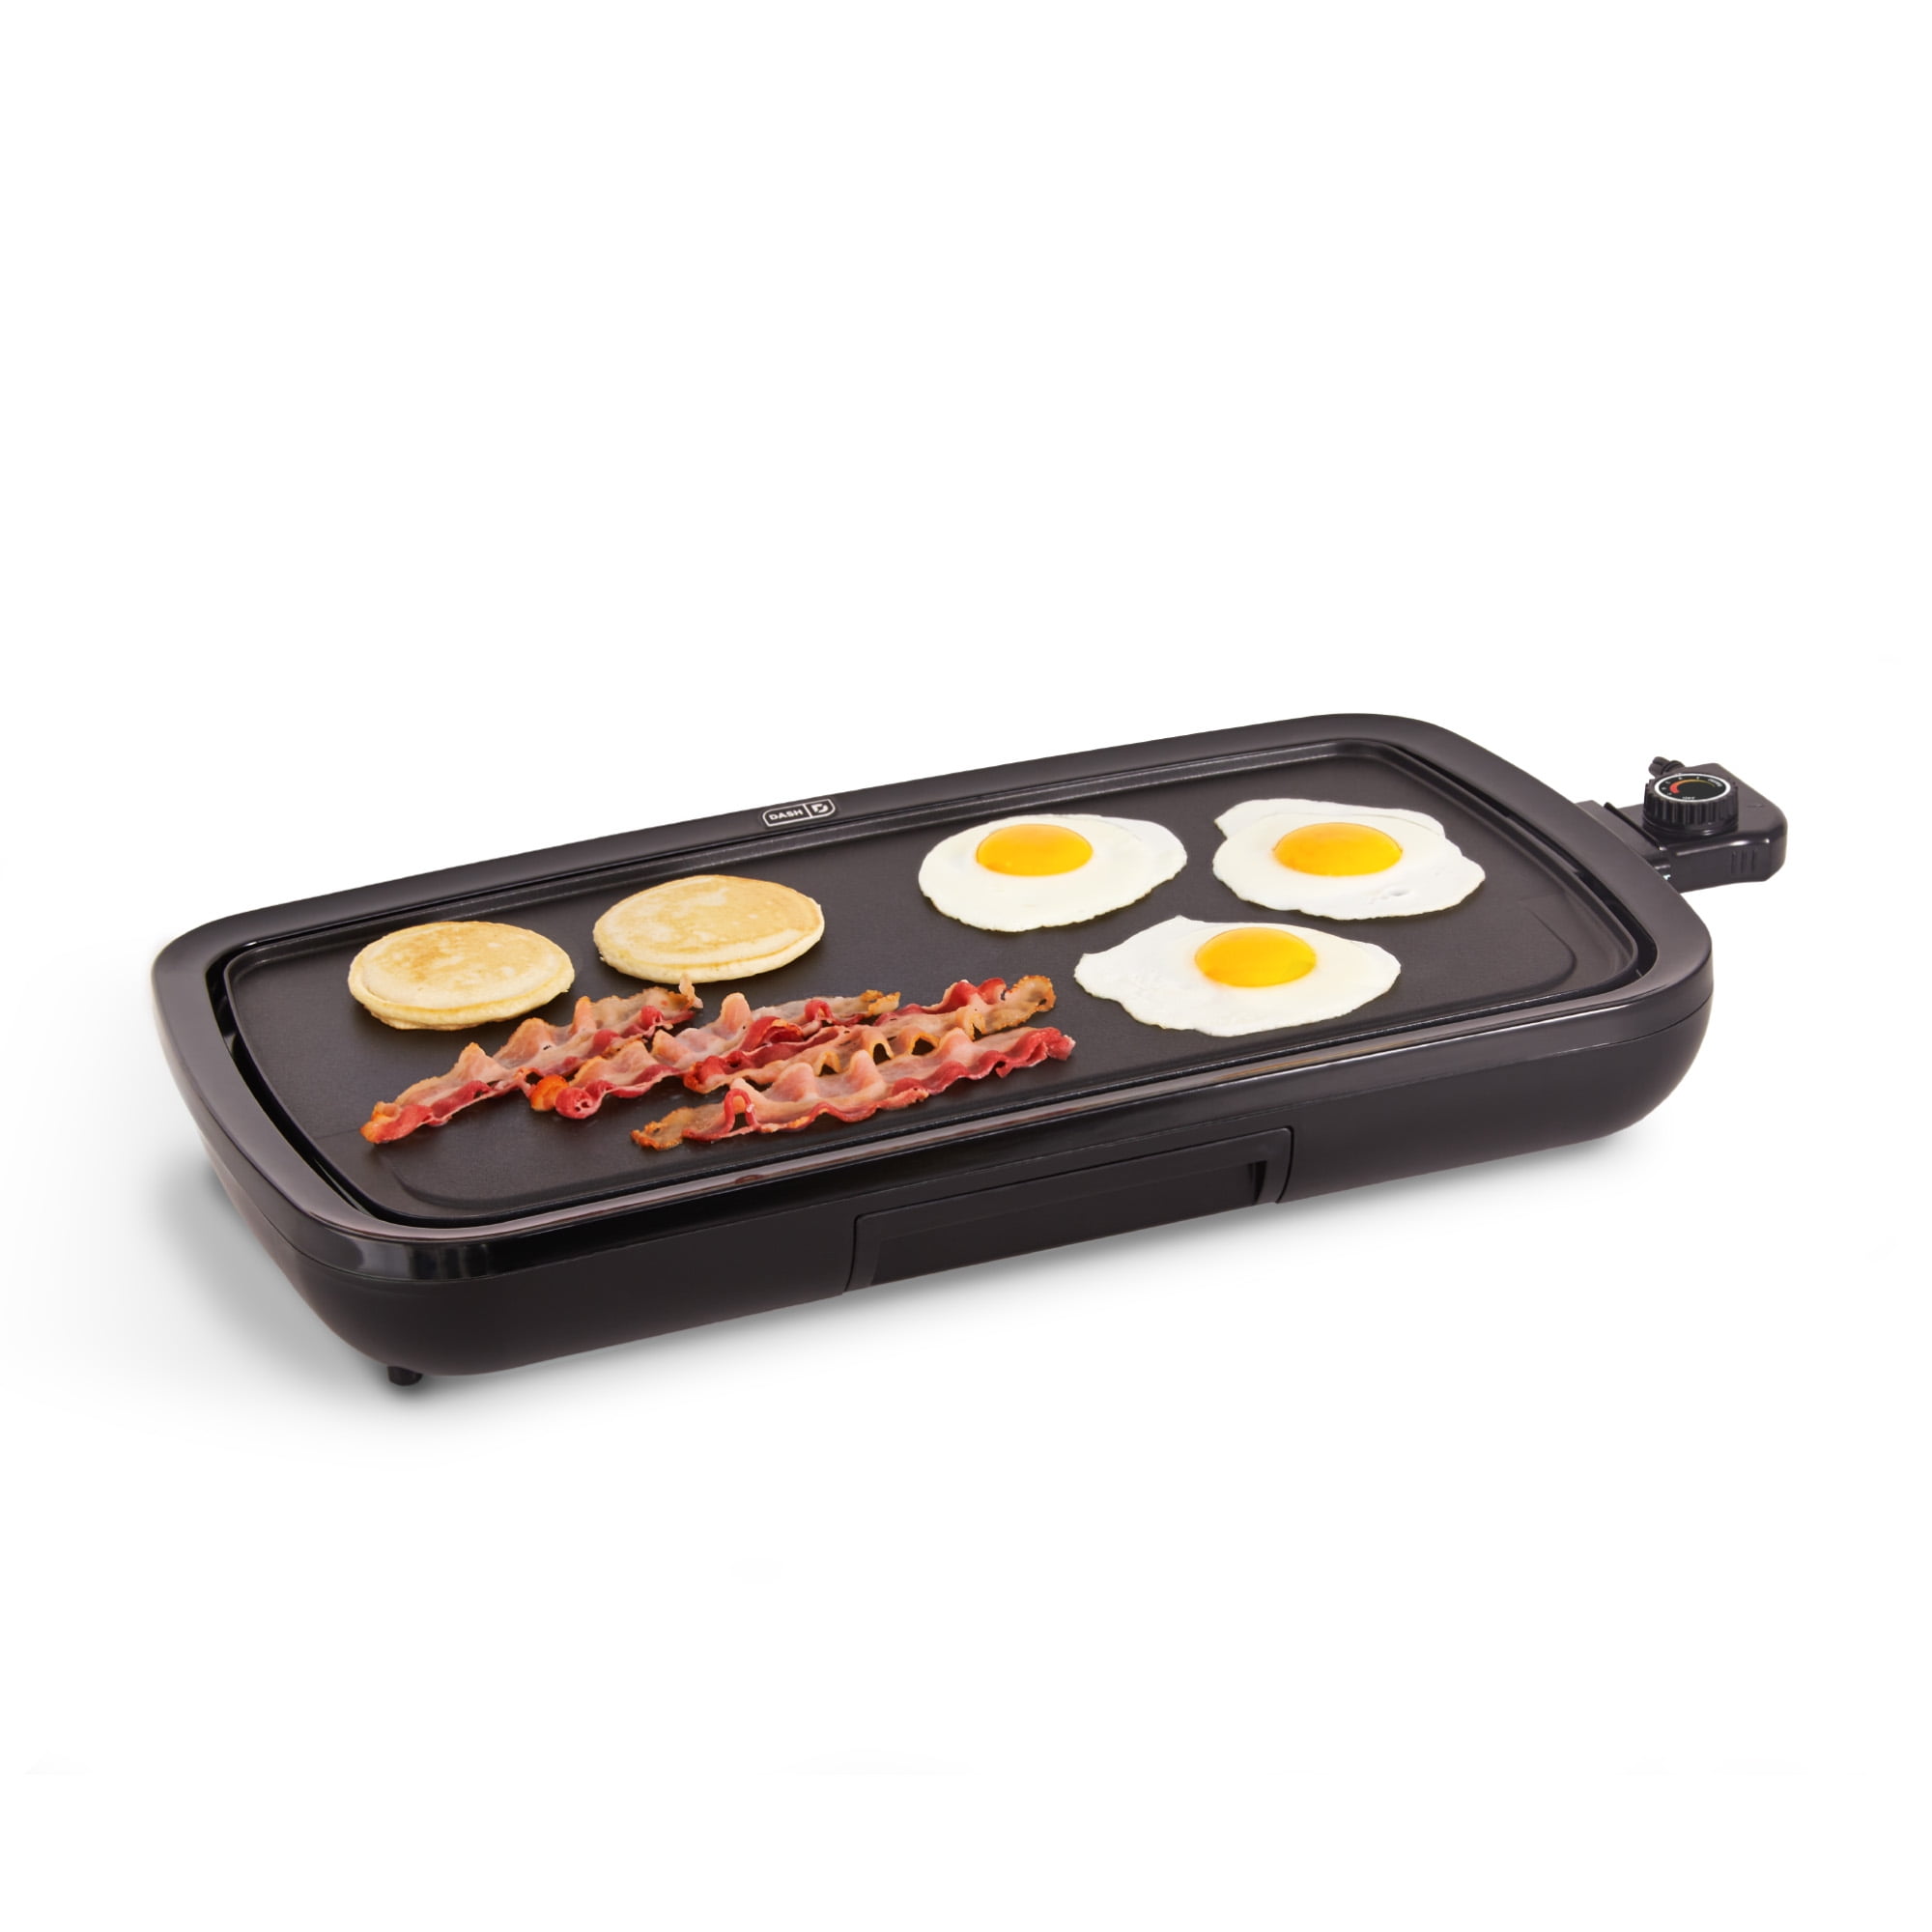 This griddle changed the way I make pancakes — and much more.